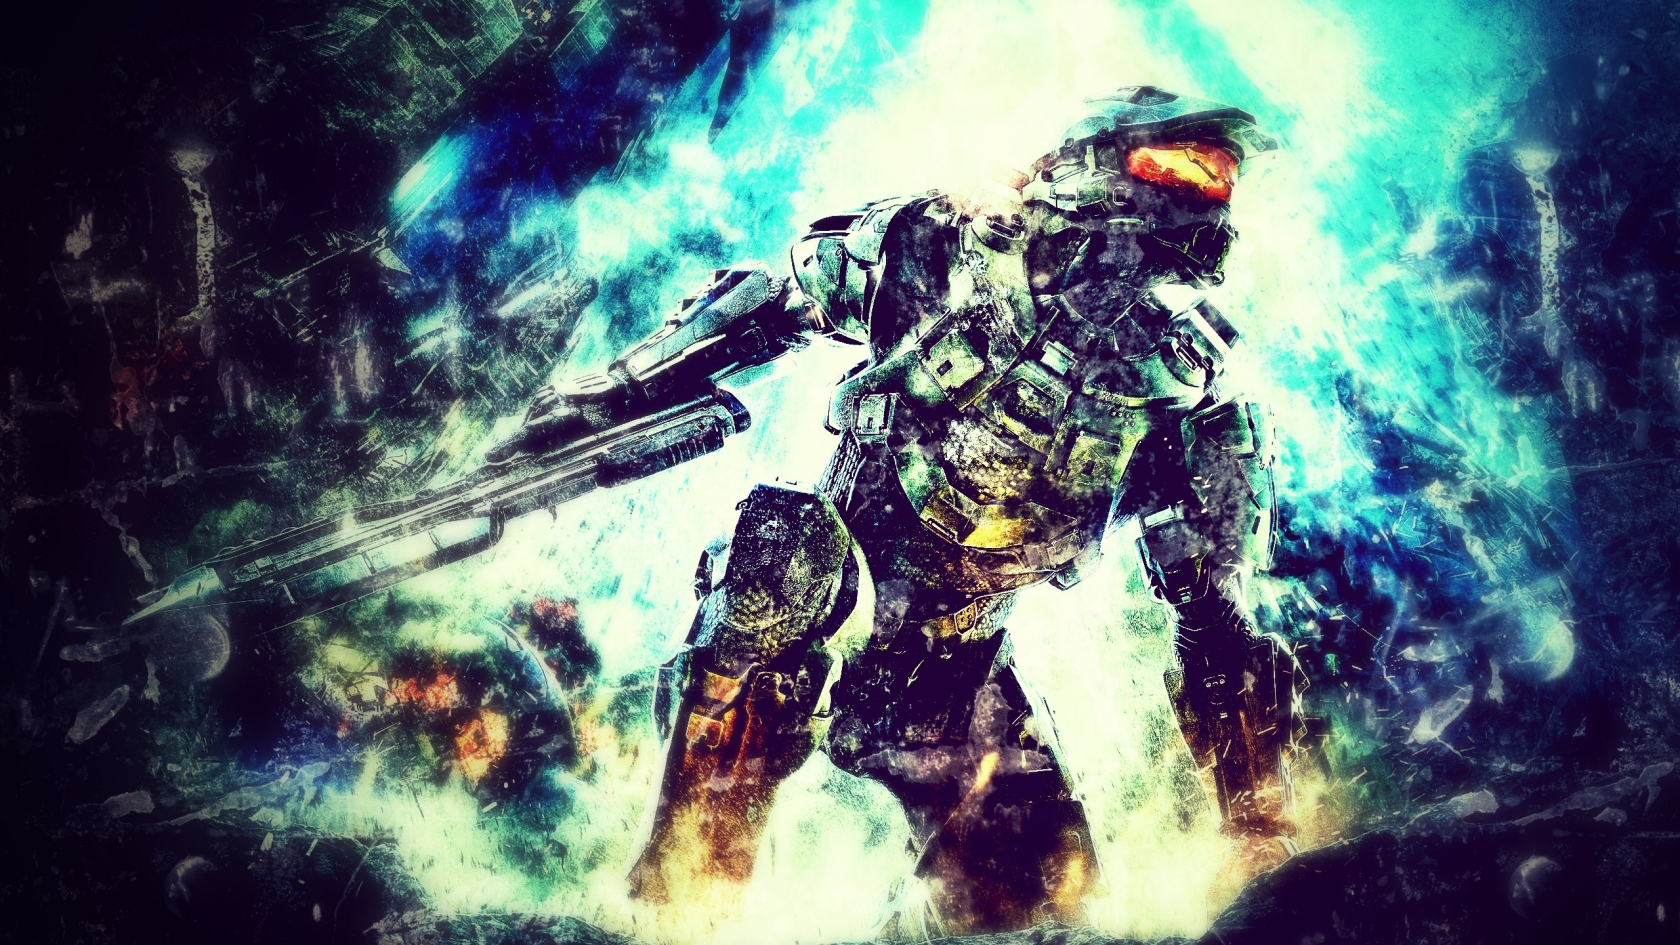 Halo 4 for 1680 x 945 HDTV resolution